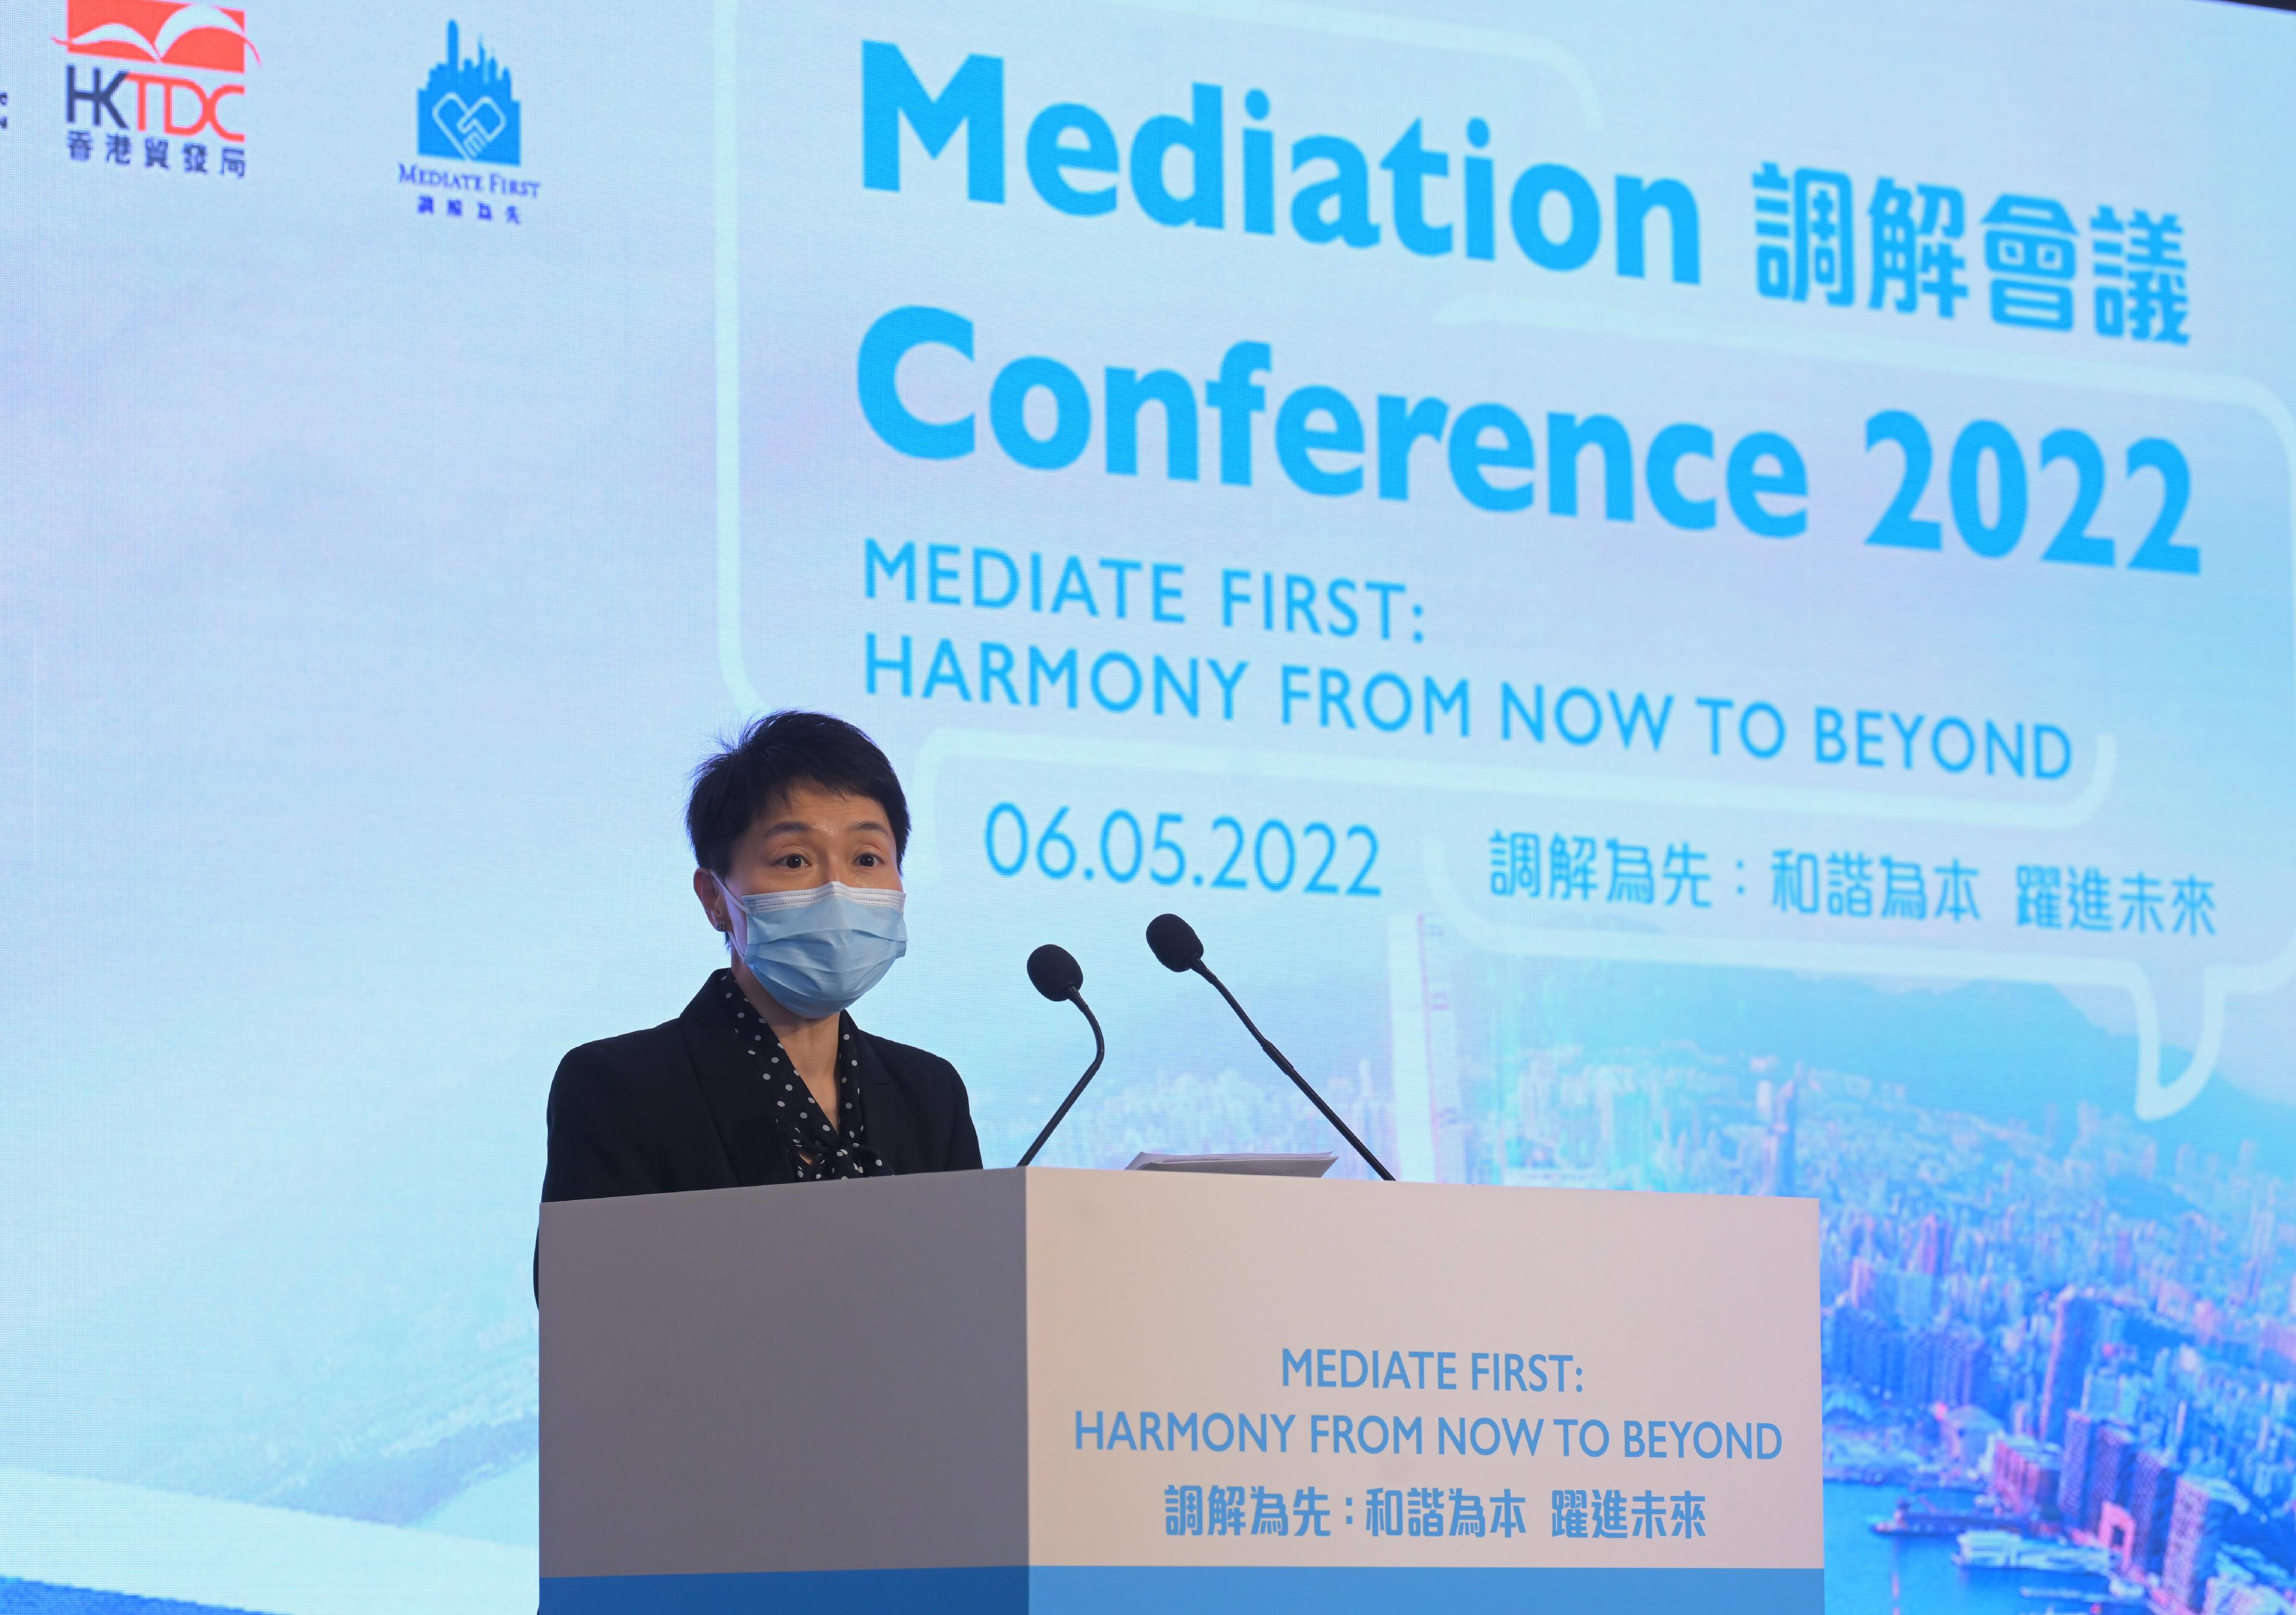 The Mediation Conference 2022 co-organised by the Department of Justice (DoJ) and the Hong Kong Trade Development Council was successfully held today (May 6). Photo shows the Law Officer (Civil Law) of the DoJ, Ms Christina Cheung, delivering her closing remarks at the Conference.